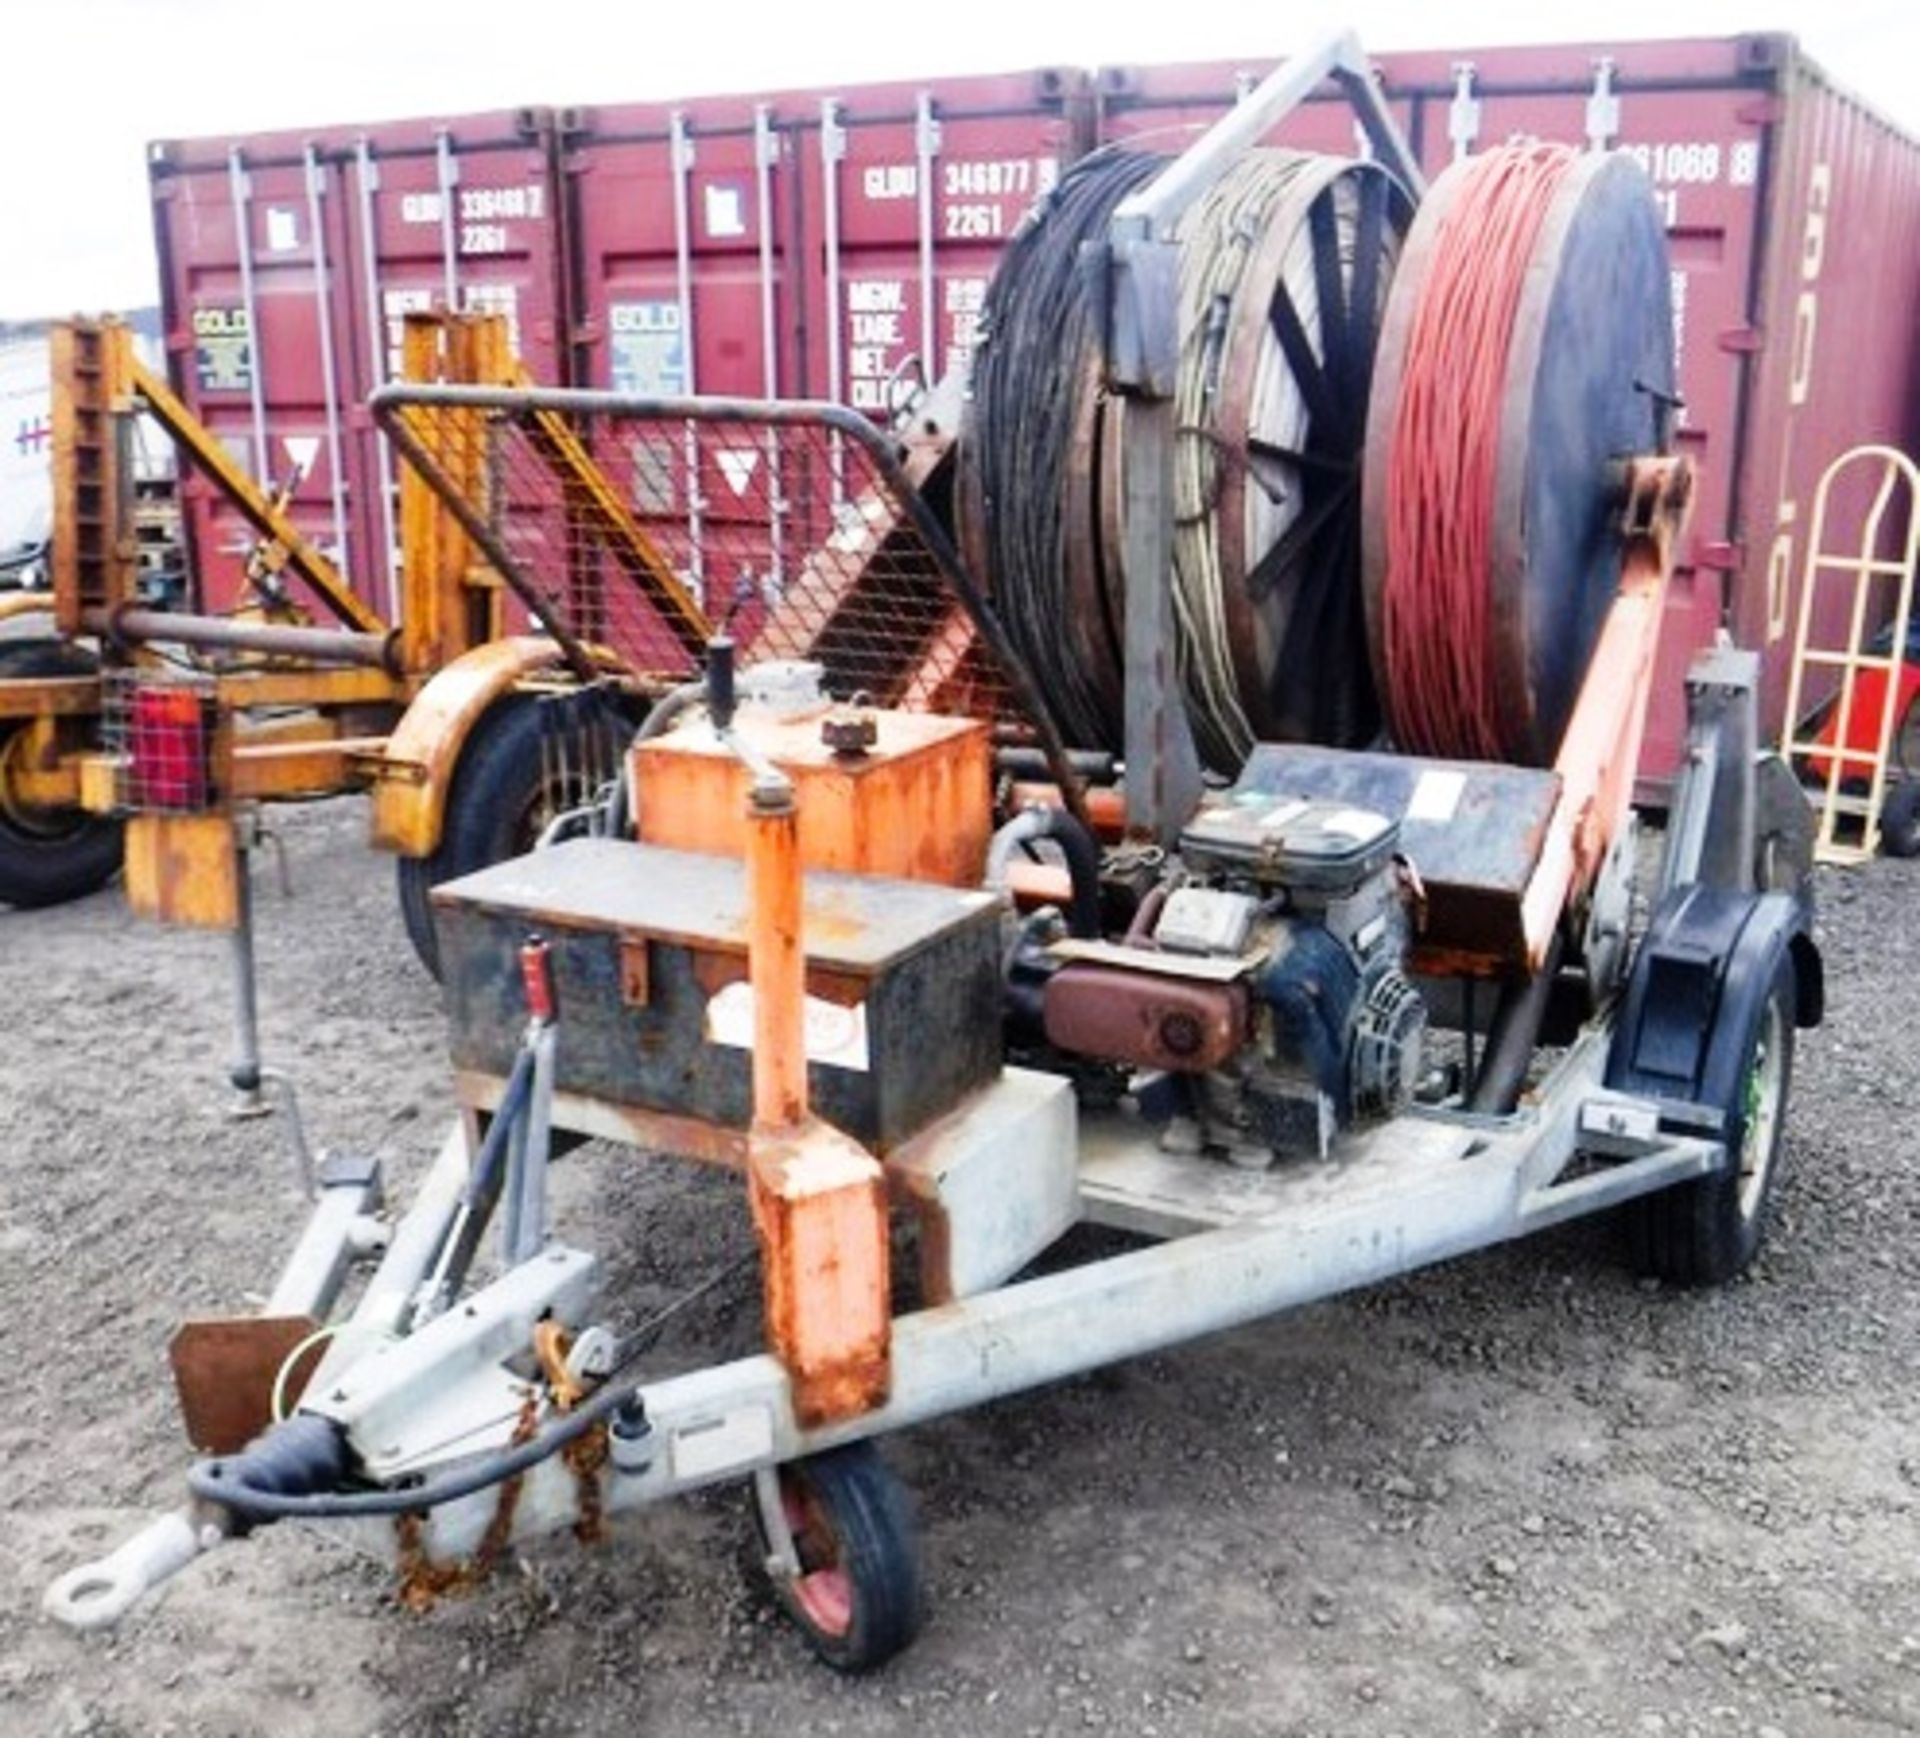 2006 CLYDESDALE single axle engine driven reel trailer. S/N 2241002. Test cert -4316. L - 11ft, W -